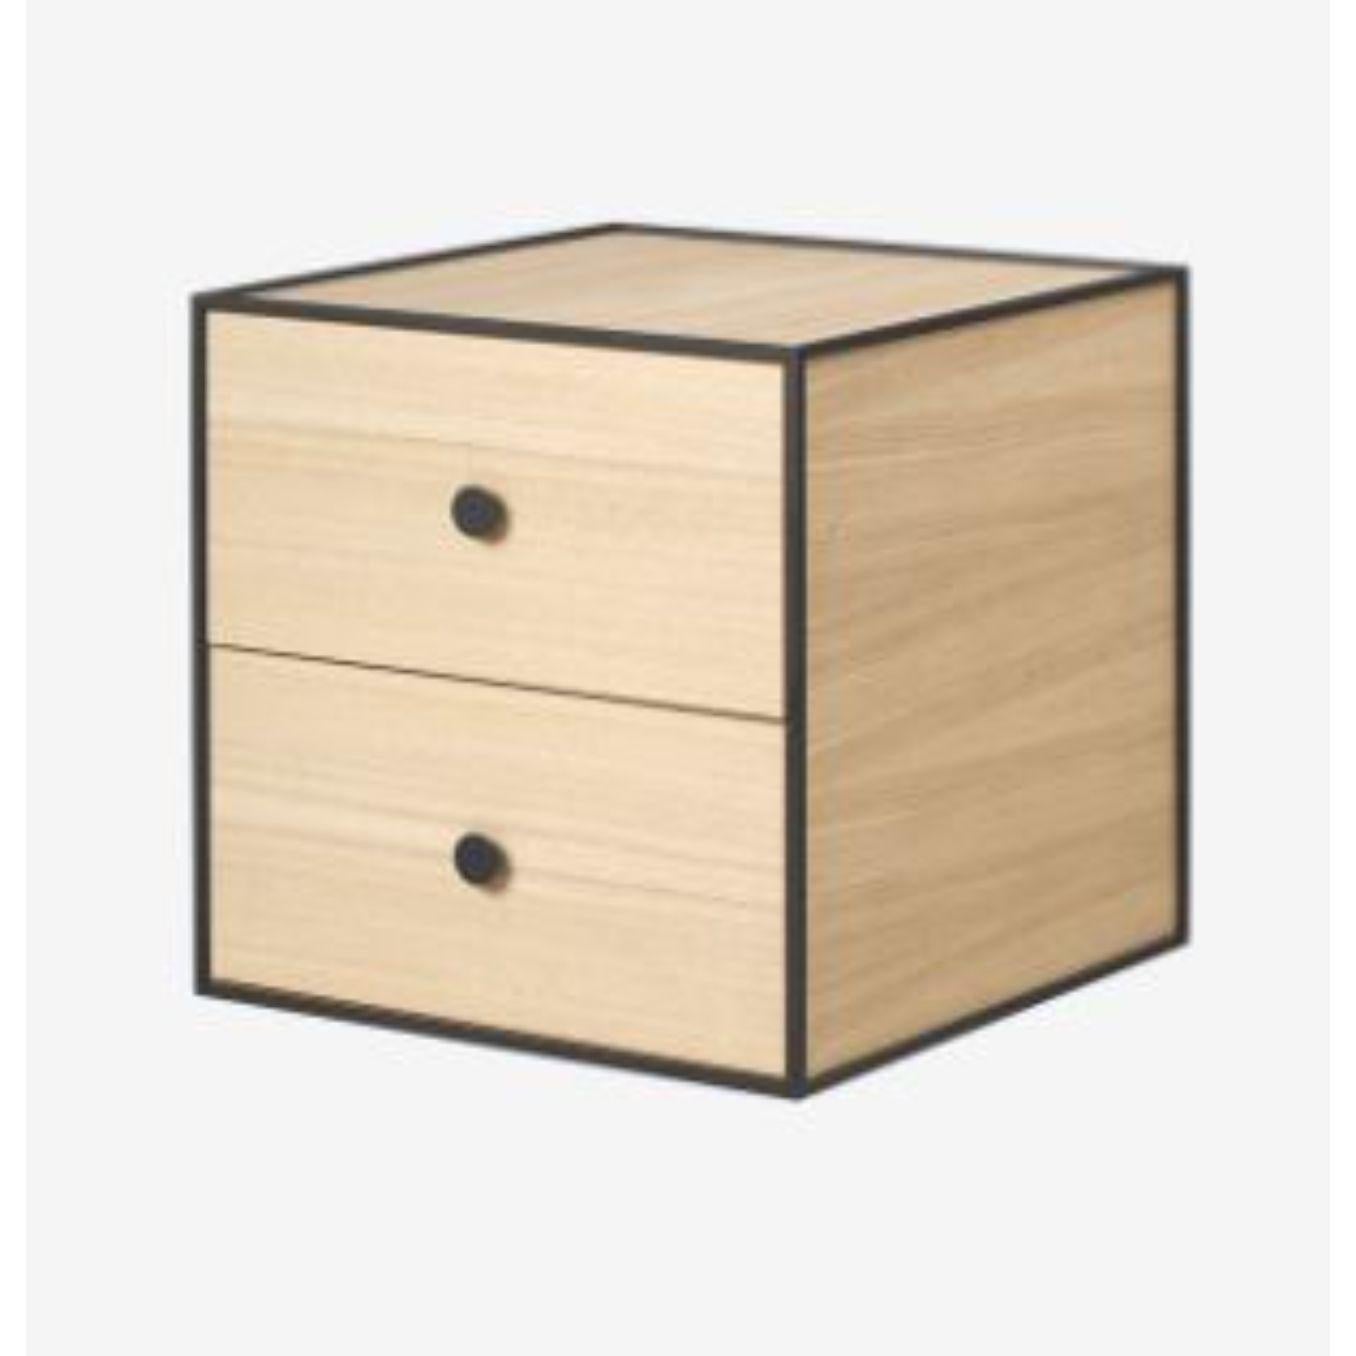 35 oak frame box with 2 drawer by Lassen
Dimensions: W 35 x D 35 x H 35 cm 
Materials: Finér, Melamin, Melamin, Melamine, Metal, Veneer, Oak
Also available in different colors and dimensions. 
Weight: 10.50, 10.50, 11.50, 11.50 Kg

Frame